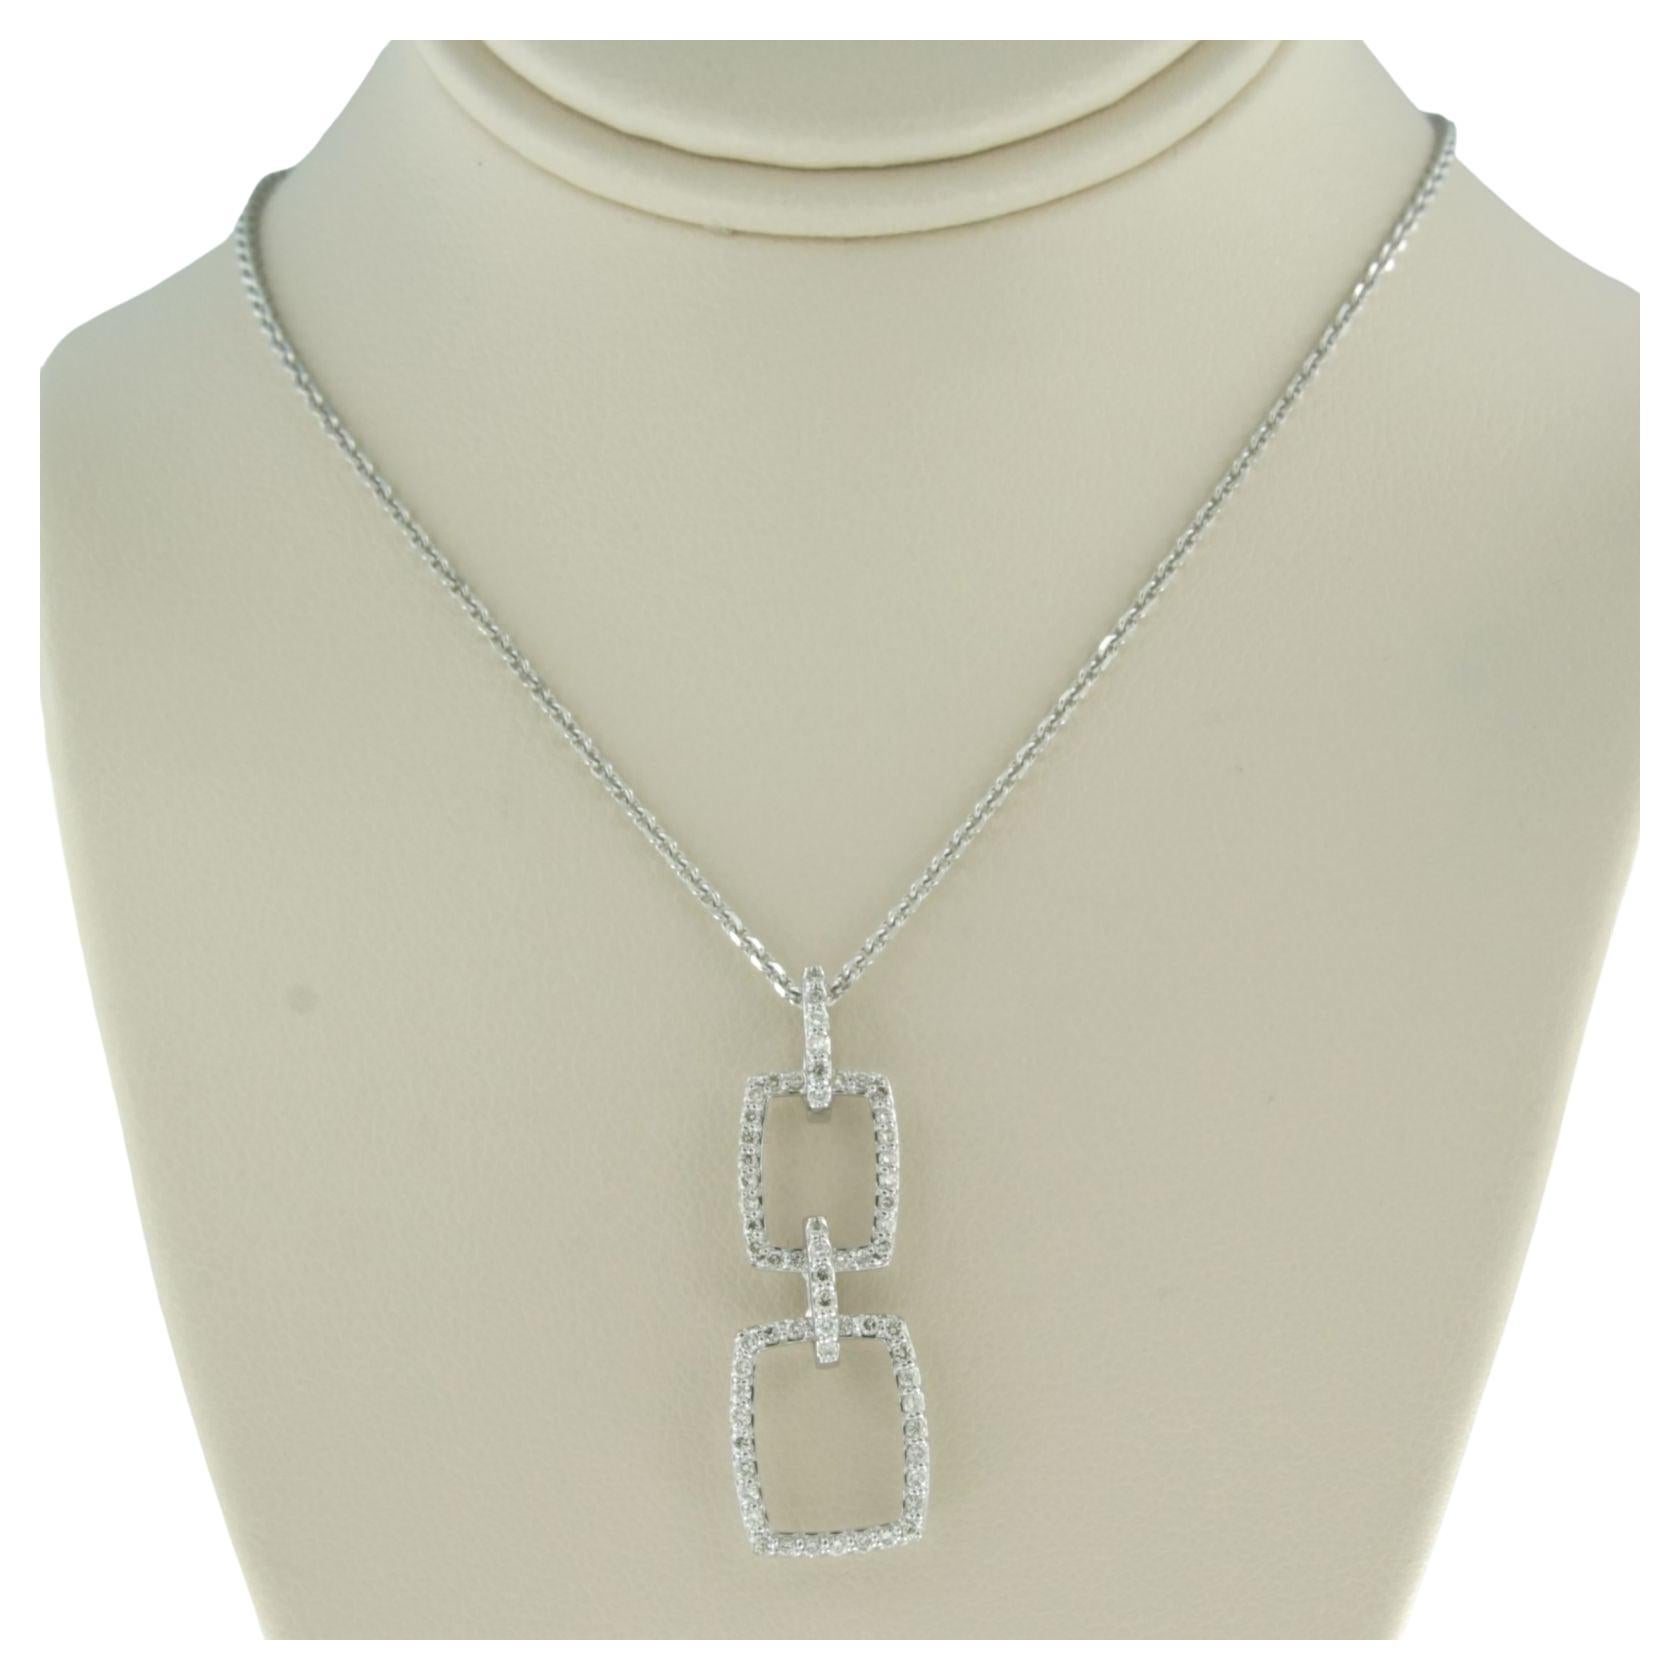 Necklace and pendant set with diamonds 18k white gold 40 cm long